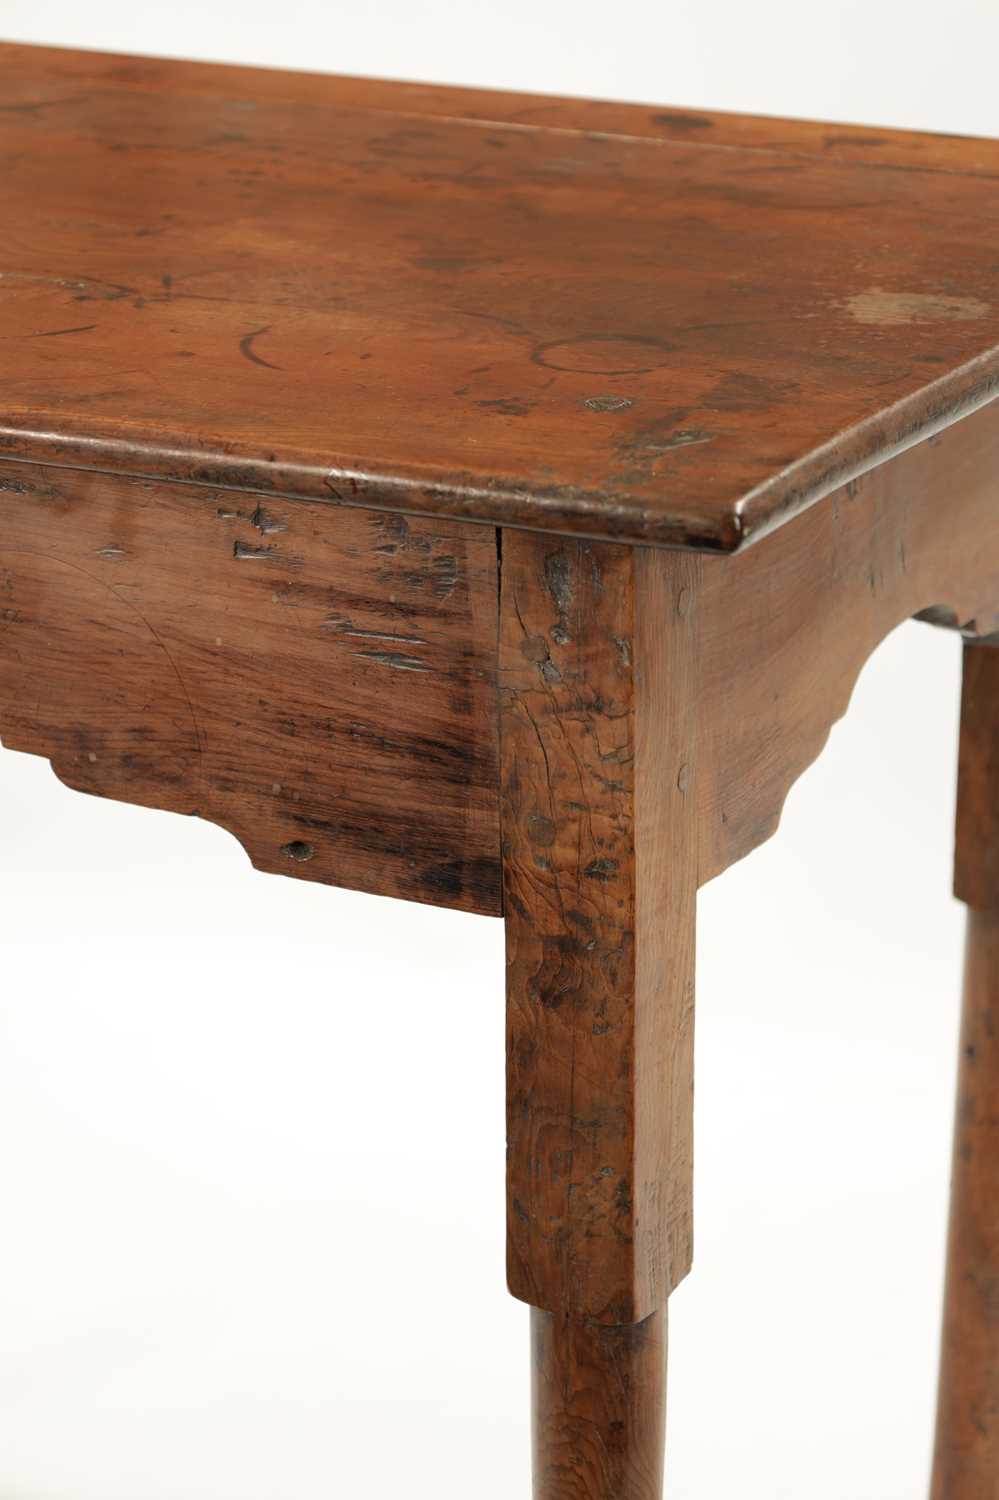 AN EARLY 18TH CENTURY YEW WOOD SIDE TABLE - Image 2 of 7